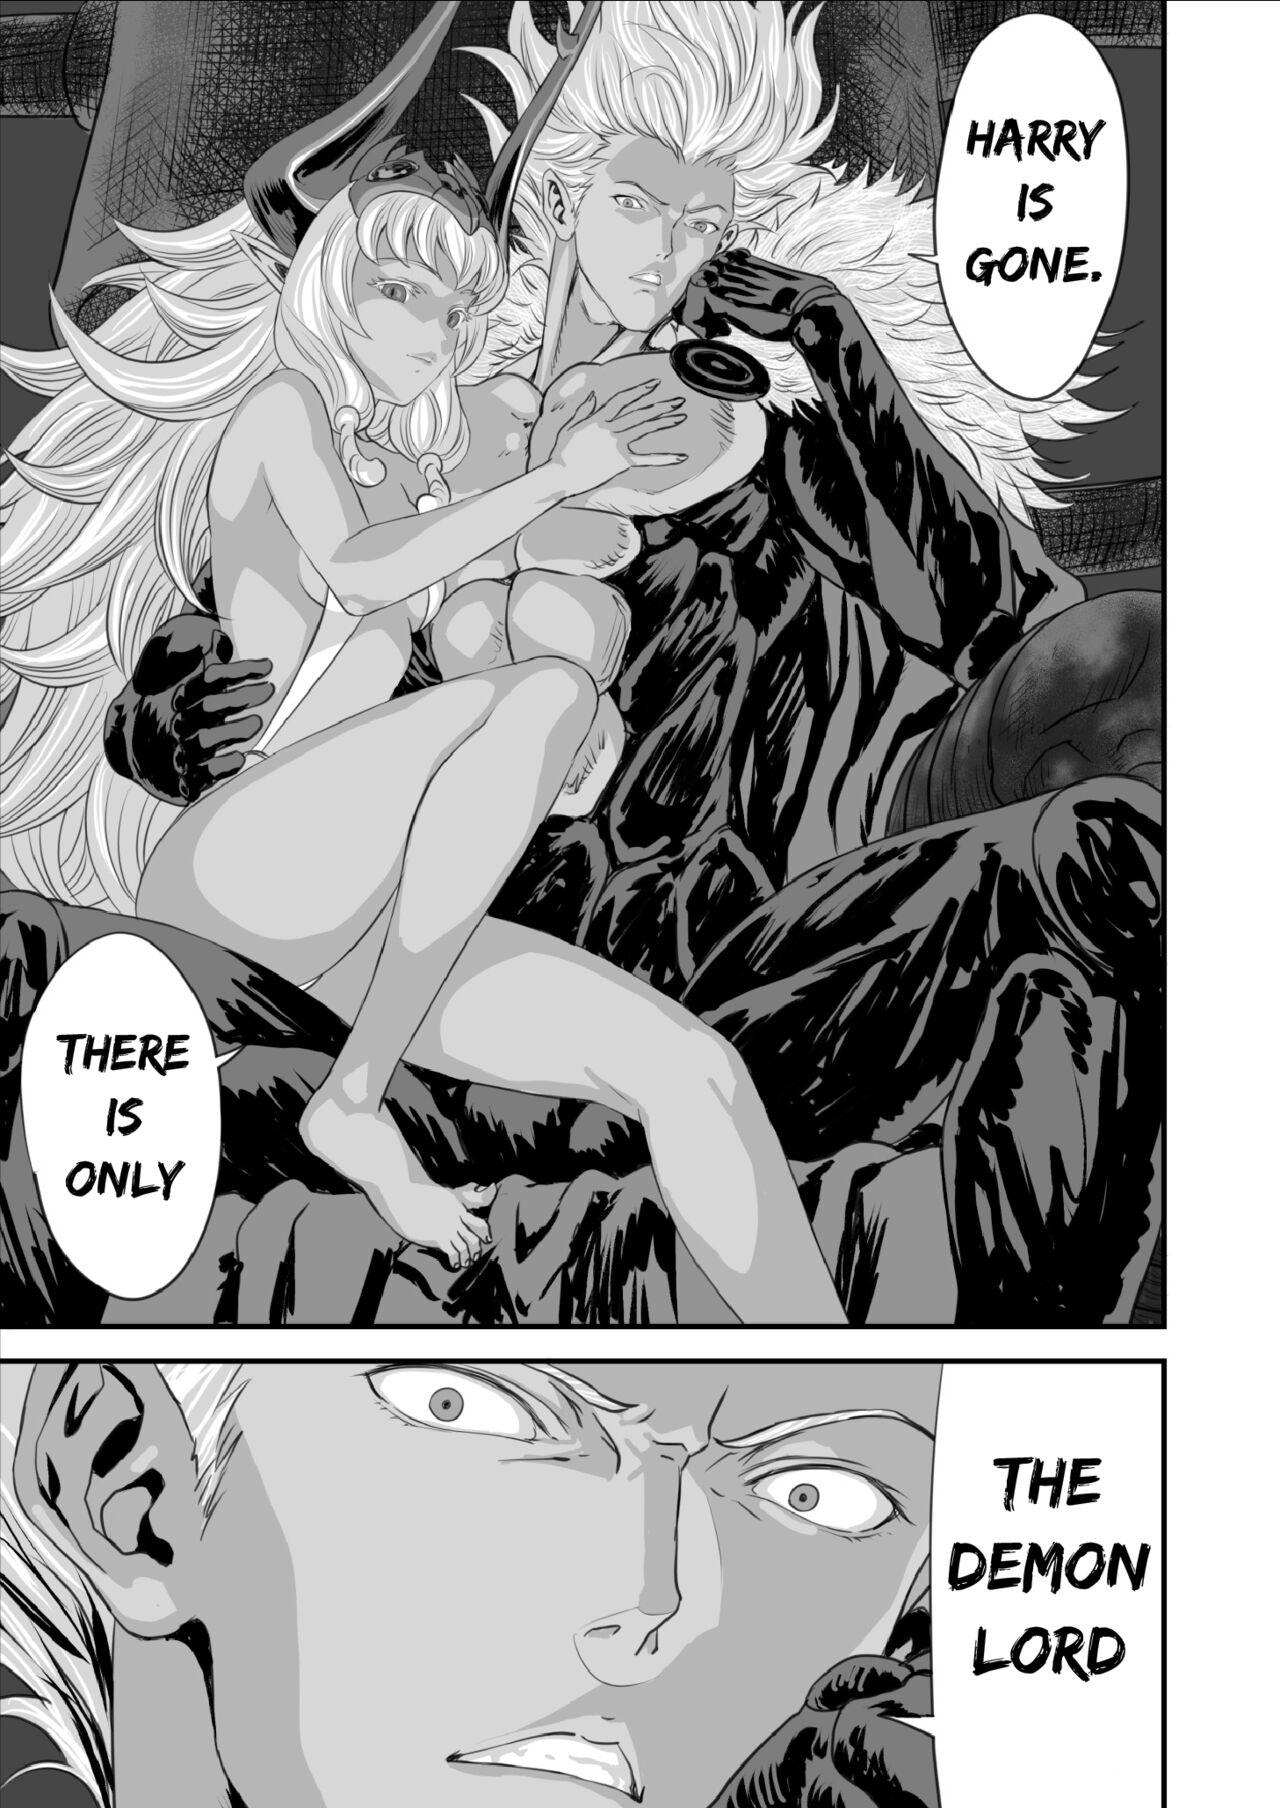 Milfporn Netorare Yuusha no Yukusue | The End of the Line for the Cuckold Hero - Original Thot - Page 64